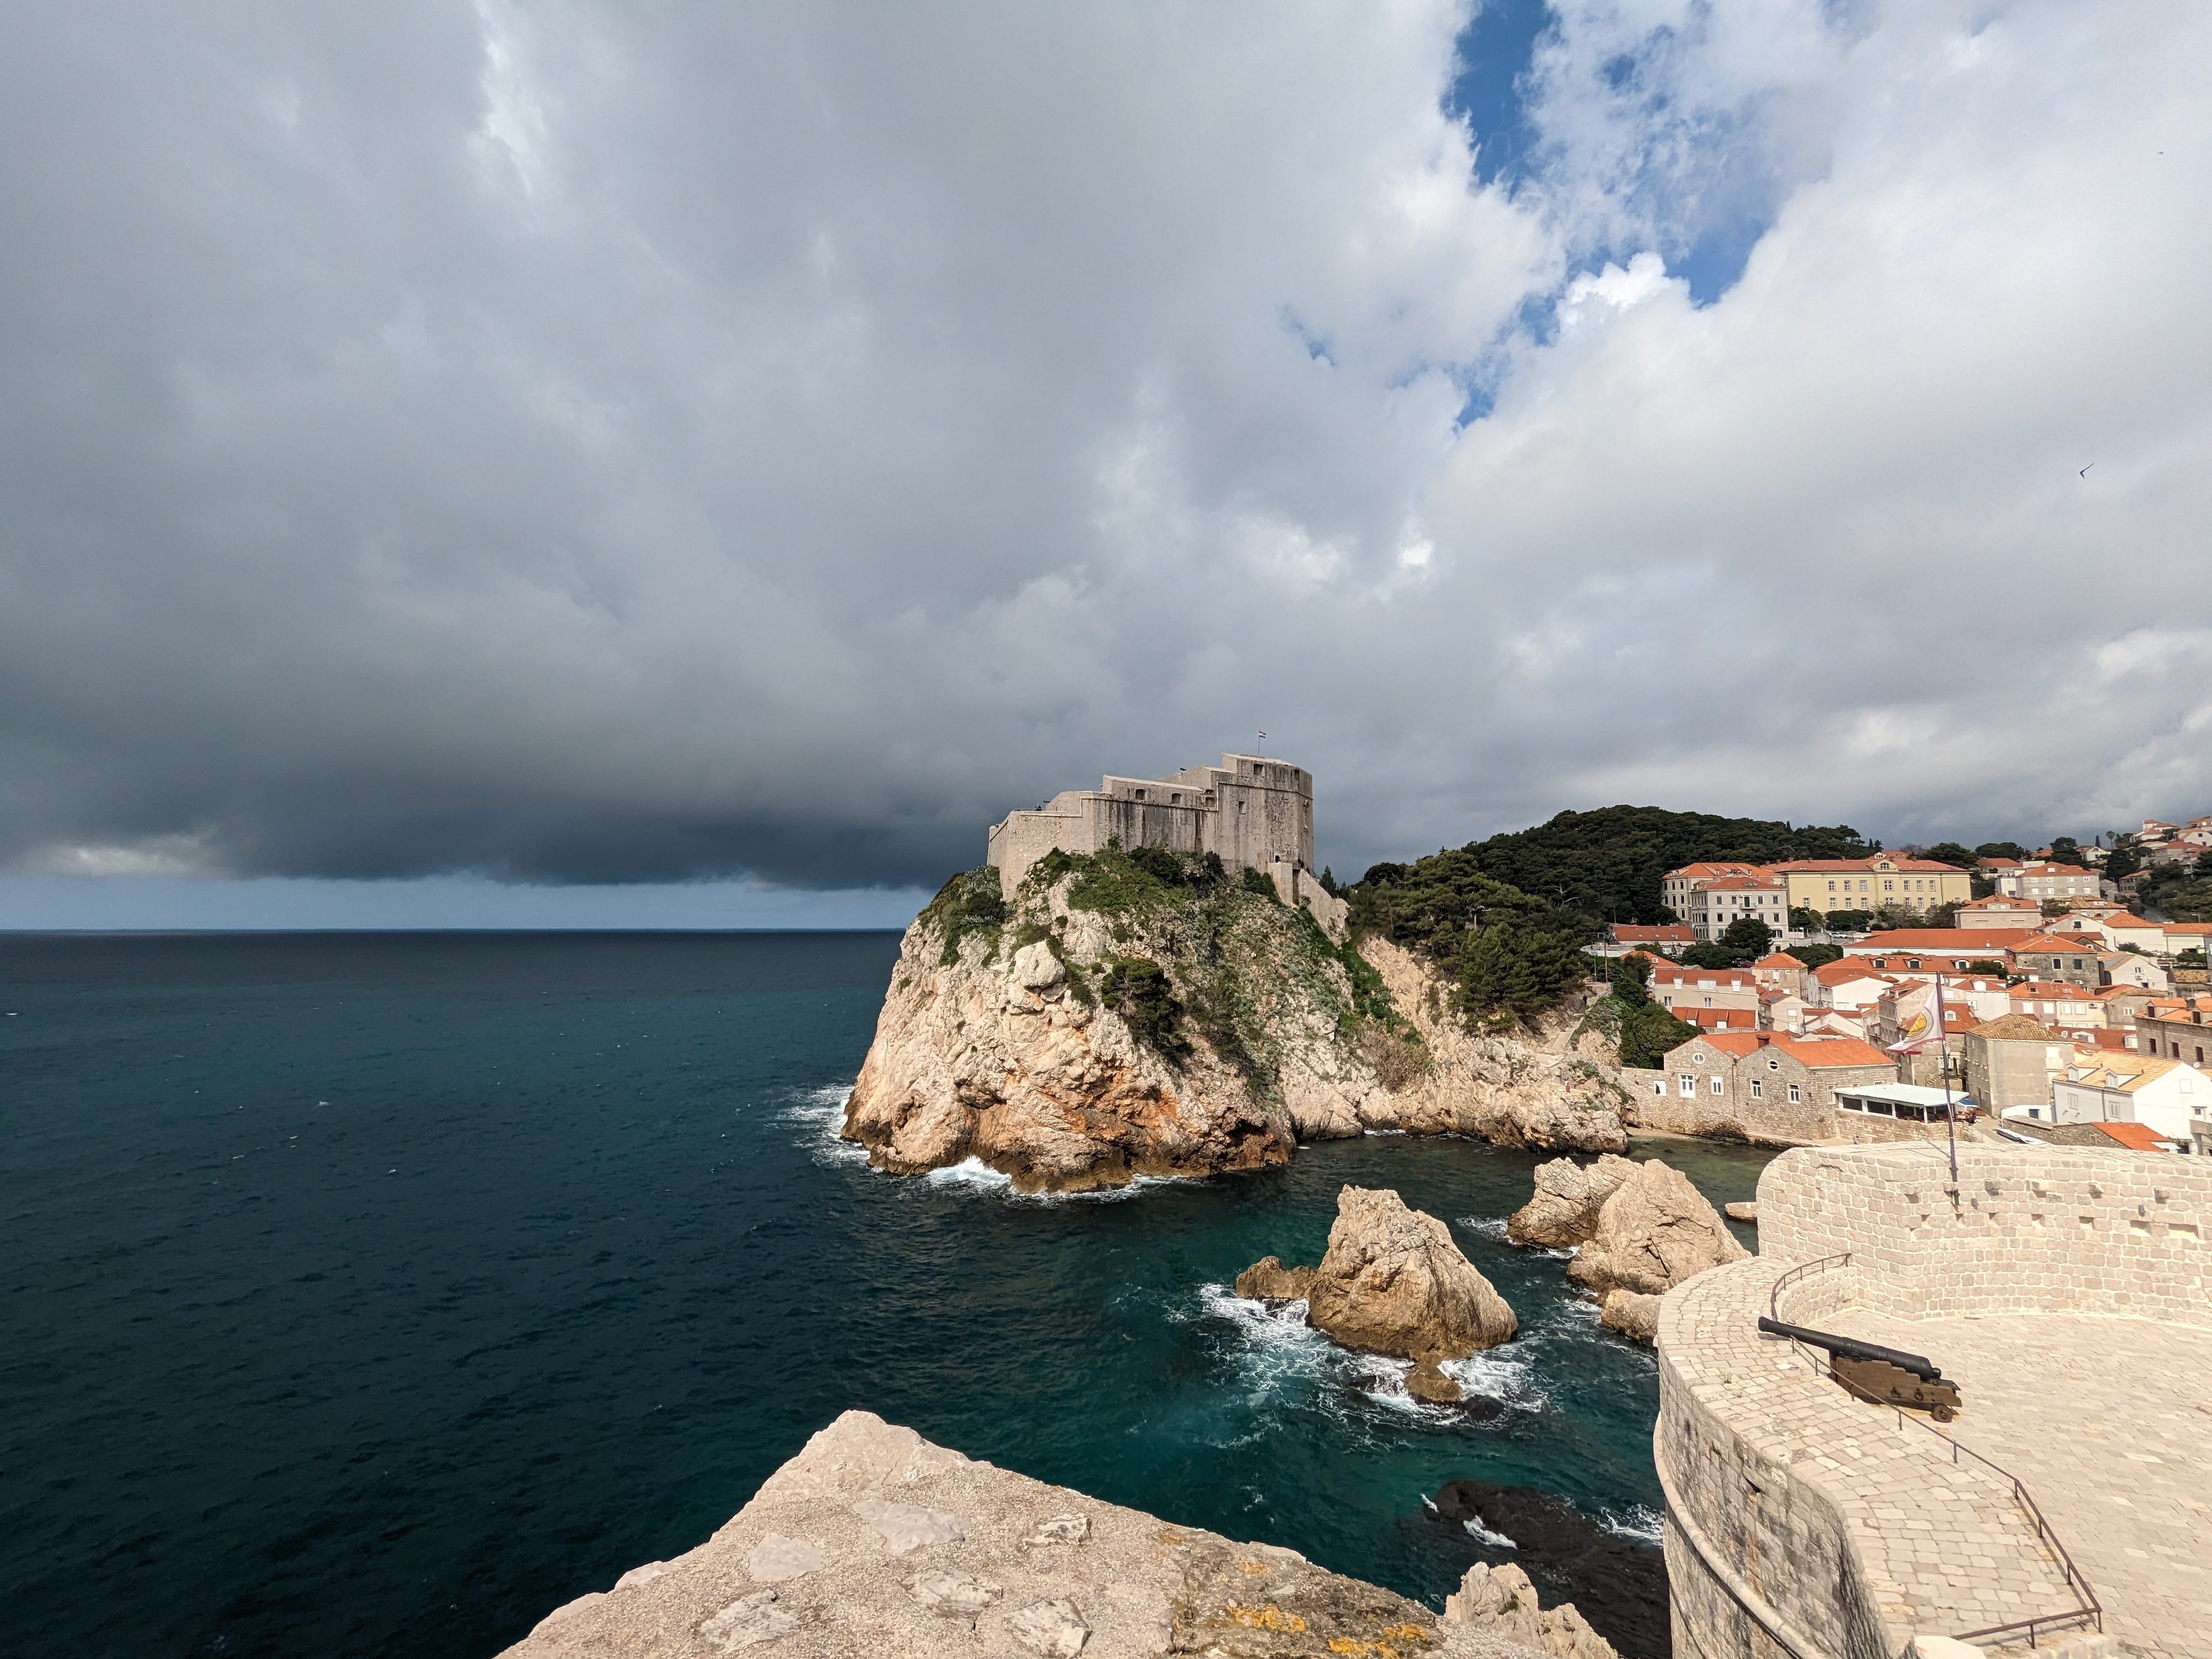 Dramatic spring weather over Fort Lovrijenac